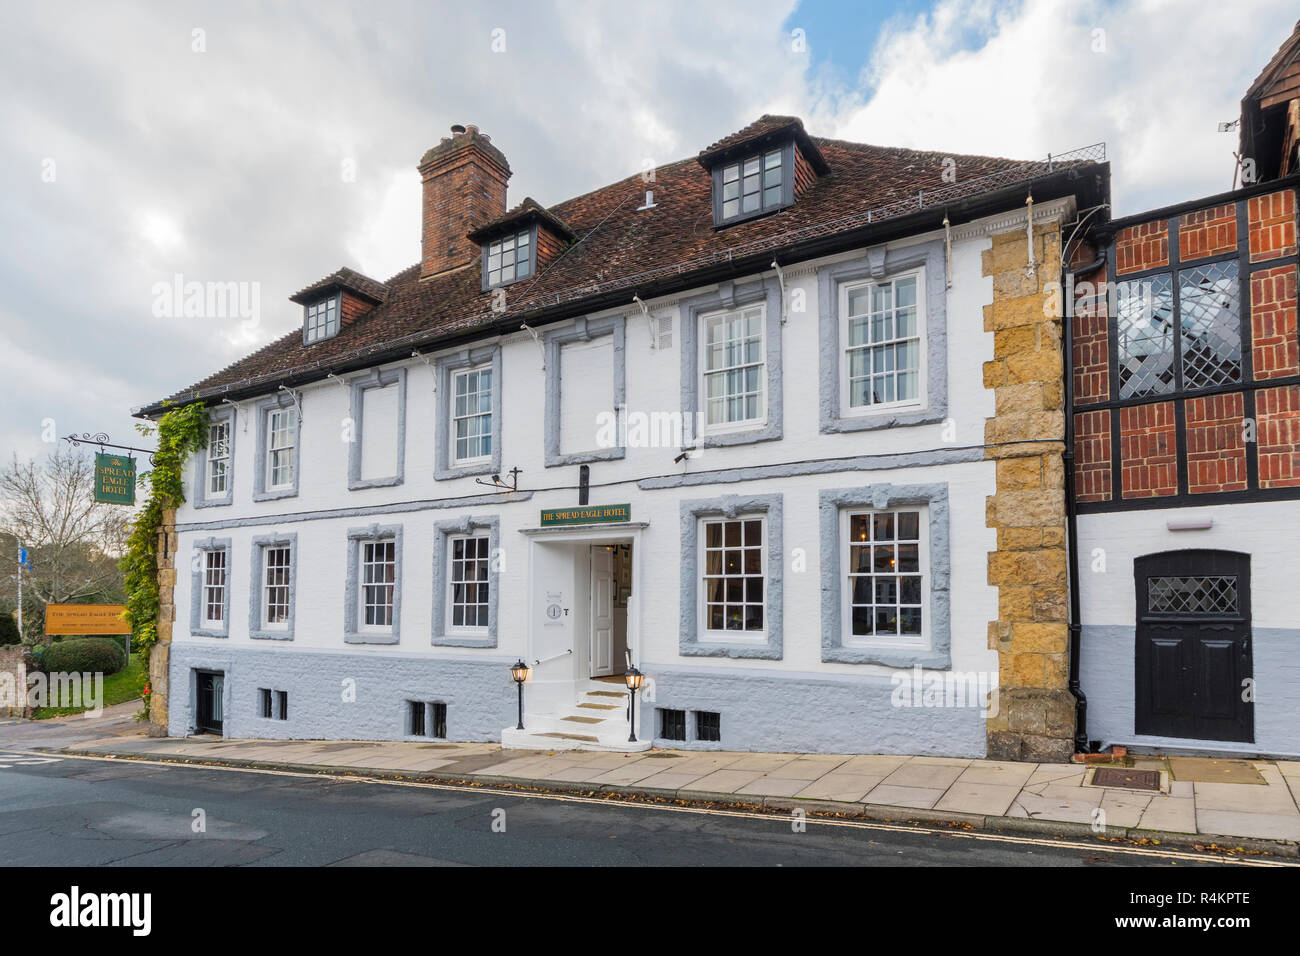 Part of The Spread Eagle Hotel & Spa, a luxury British hotel in a 1400's old Coaching Inn building in Midhurst, West Sussex, England, UK. Stock Photo